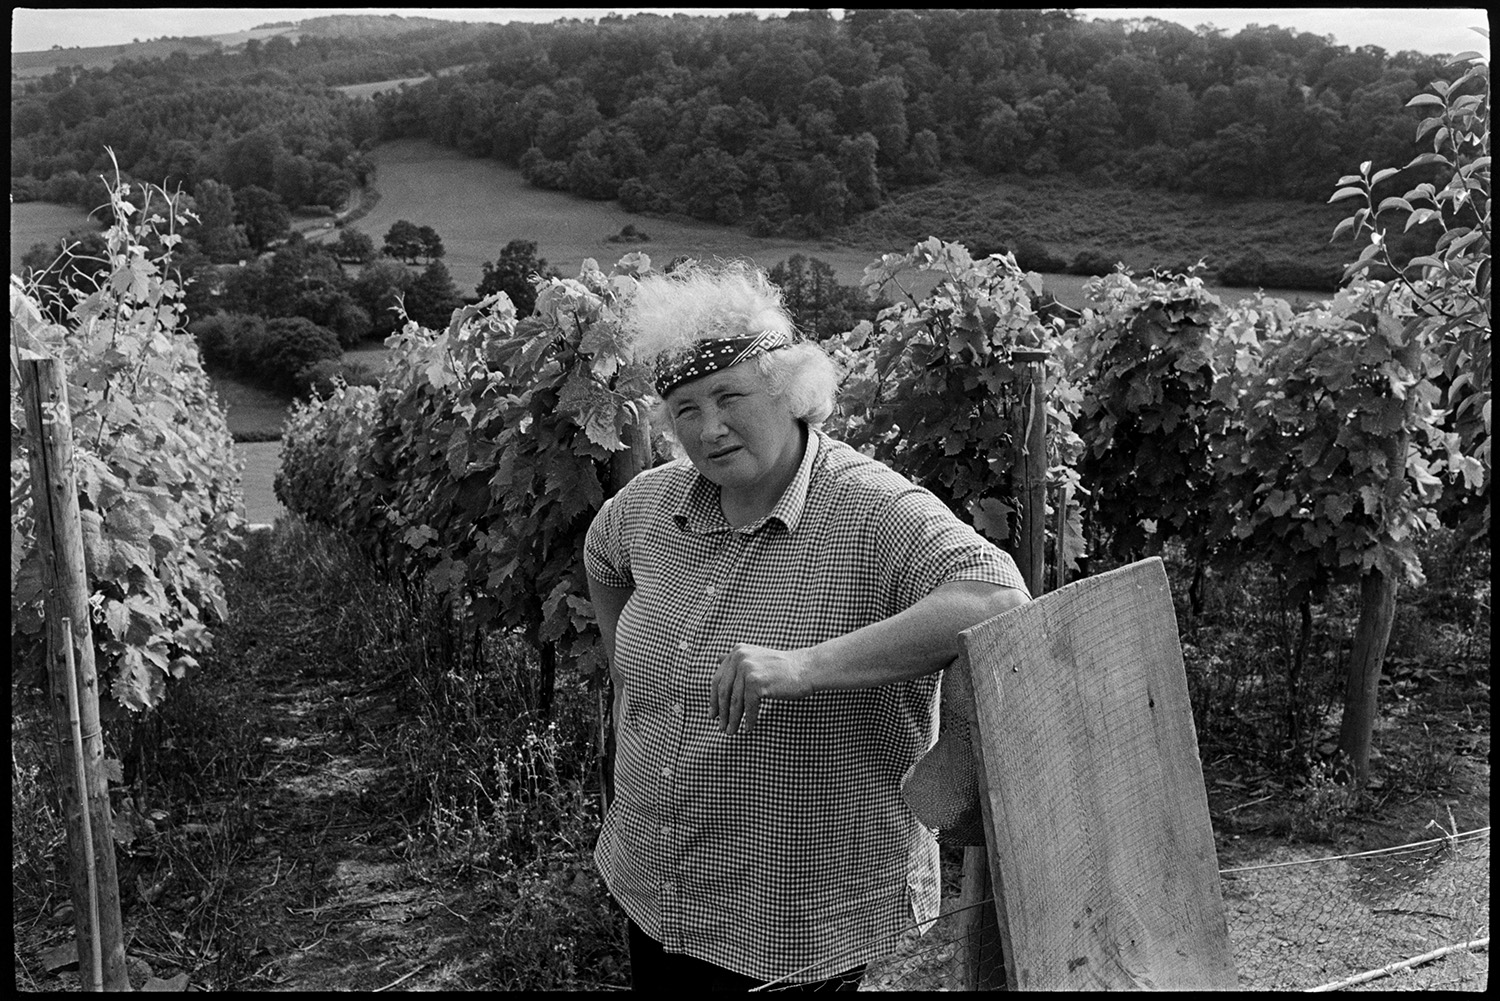 Woman and her vineyard. 
[Gillian Pearks stood by rows of grapes and vines in her vineyard at Bickleigh. A landscape of fields and woodland is visible in the background.]